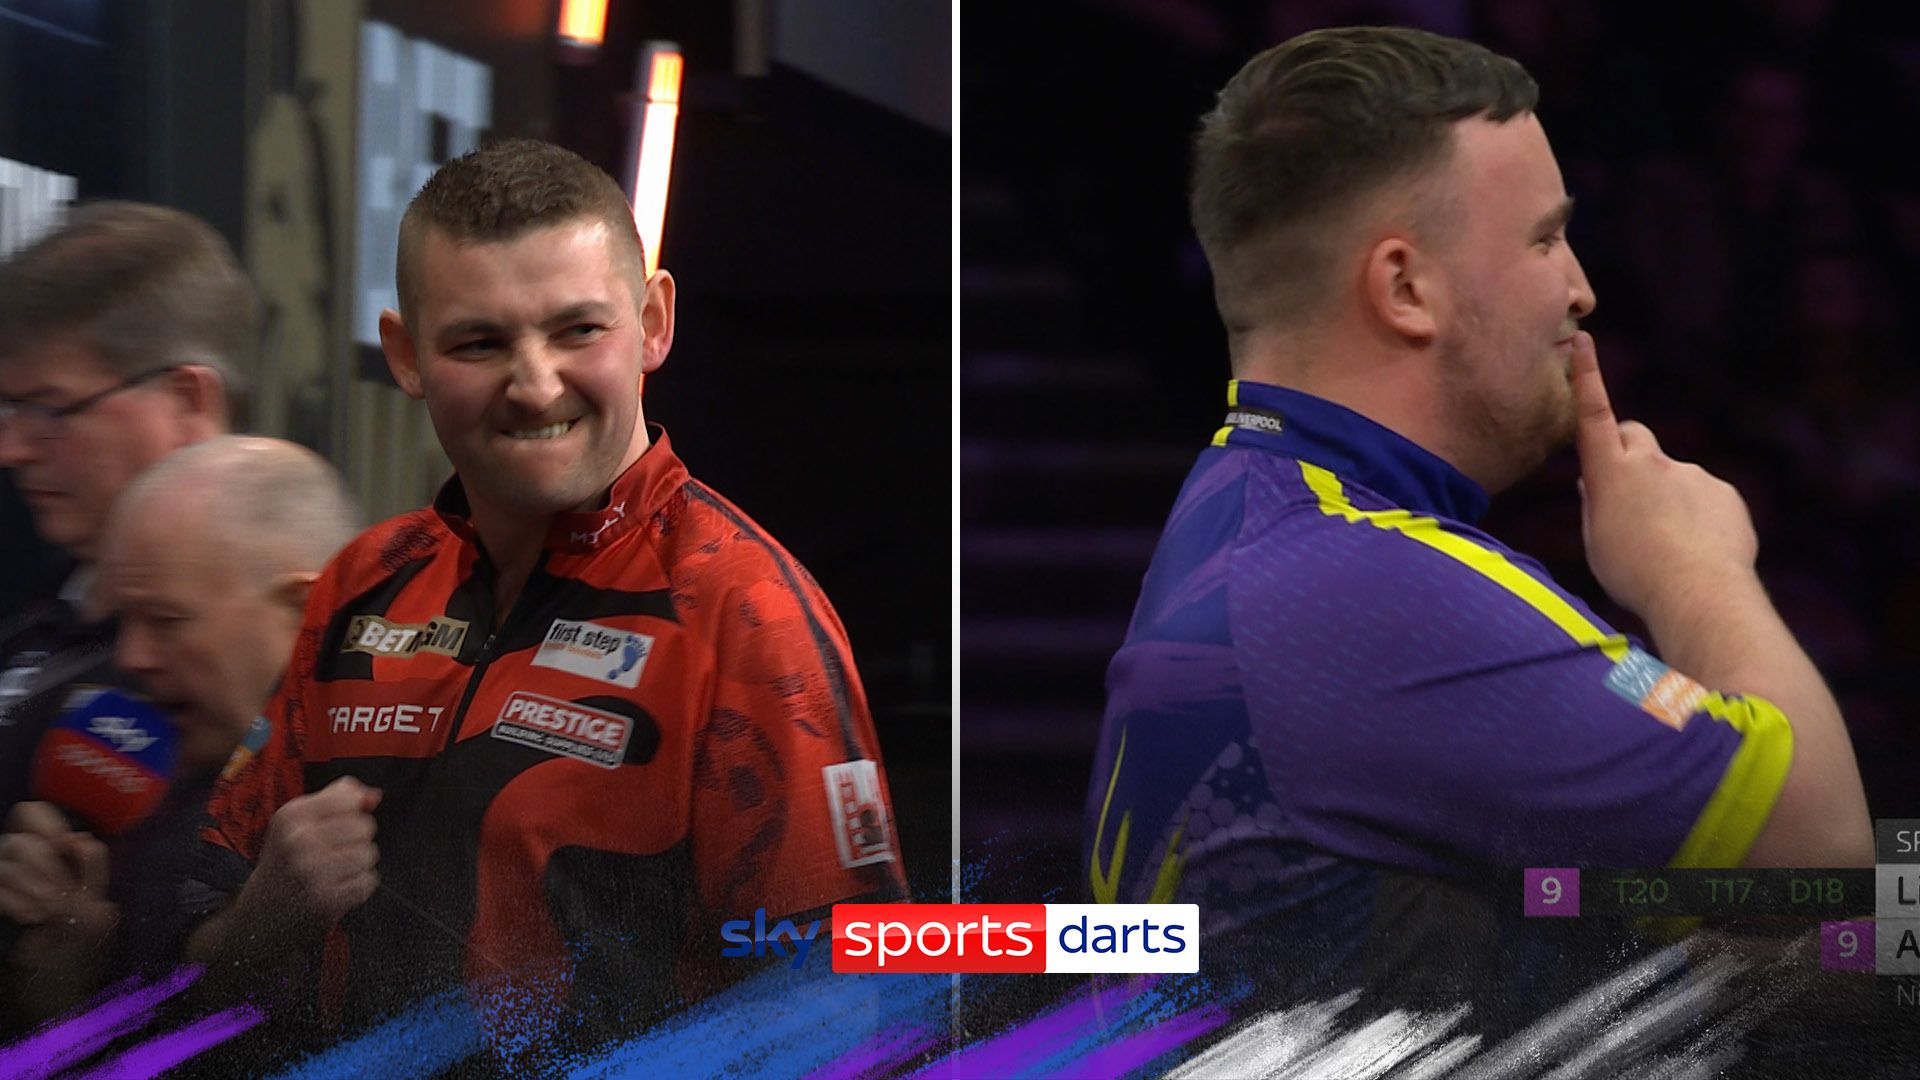 Littler and Aspinall wow crowd with nine perfect darts between them!